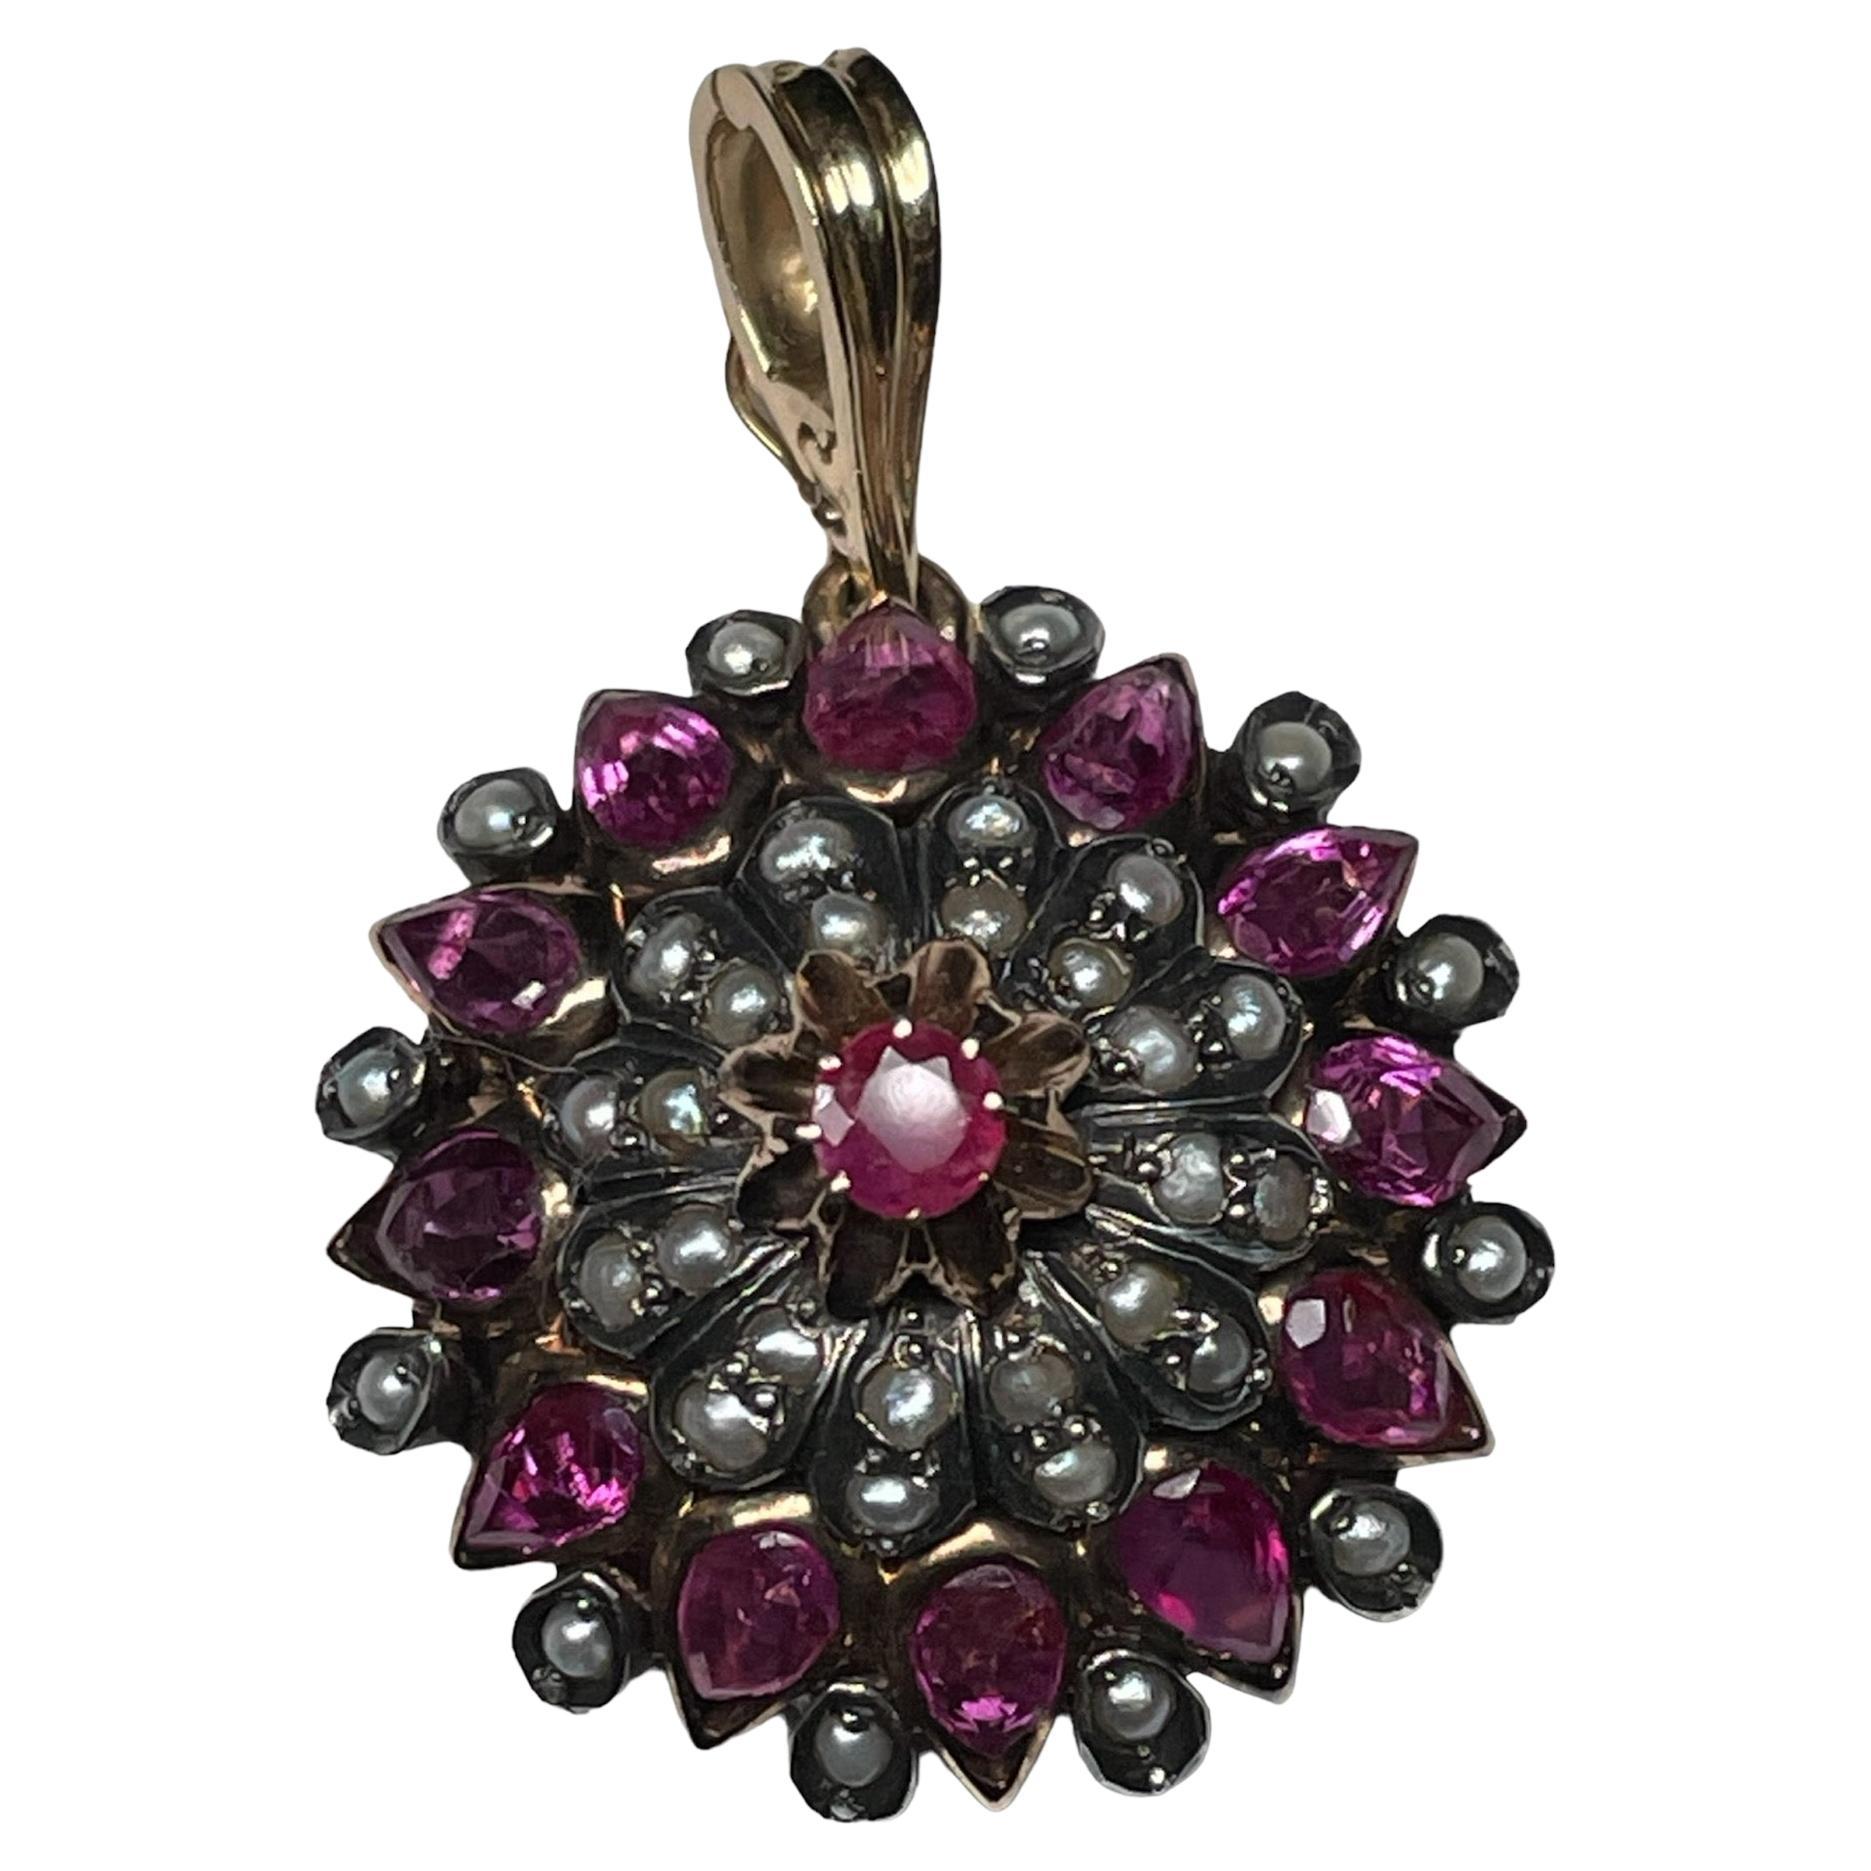 Victorian Style Rose Gold Rubies And Seed Pearls Pendant